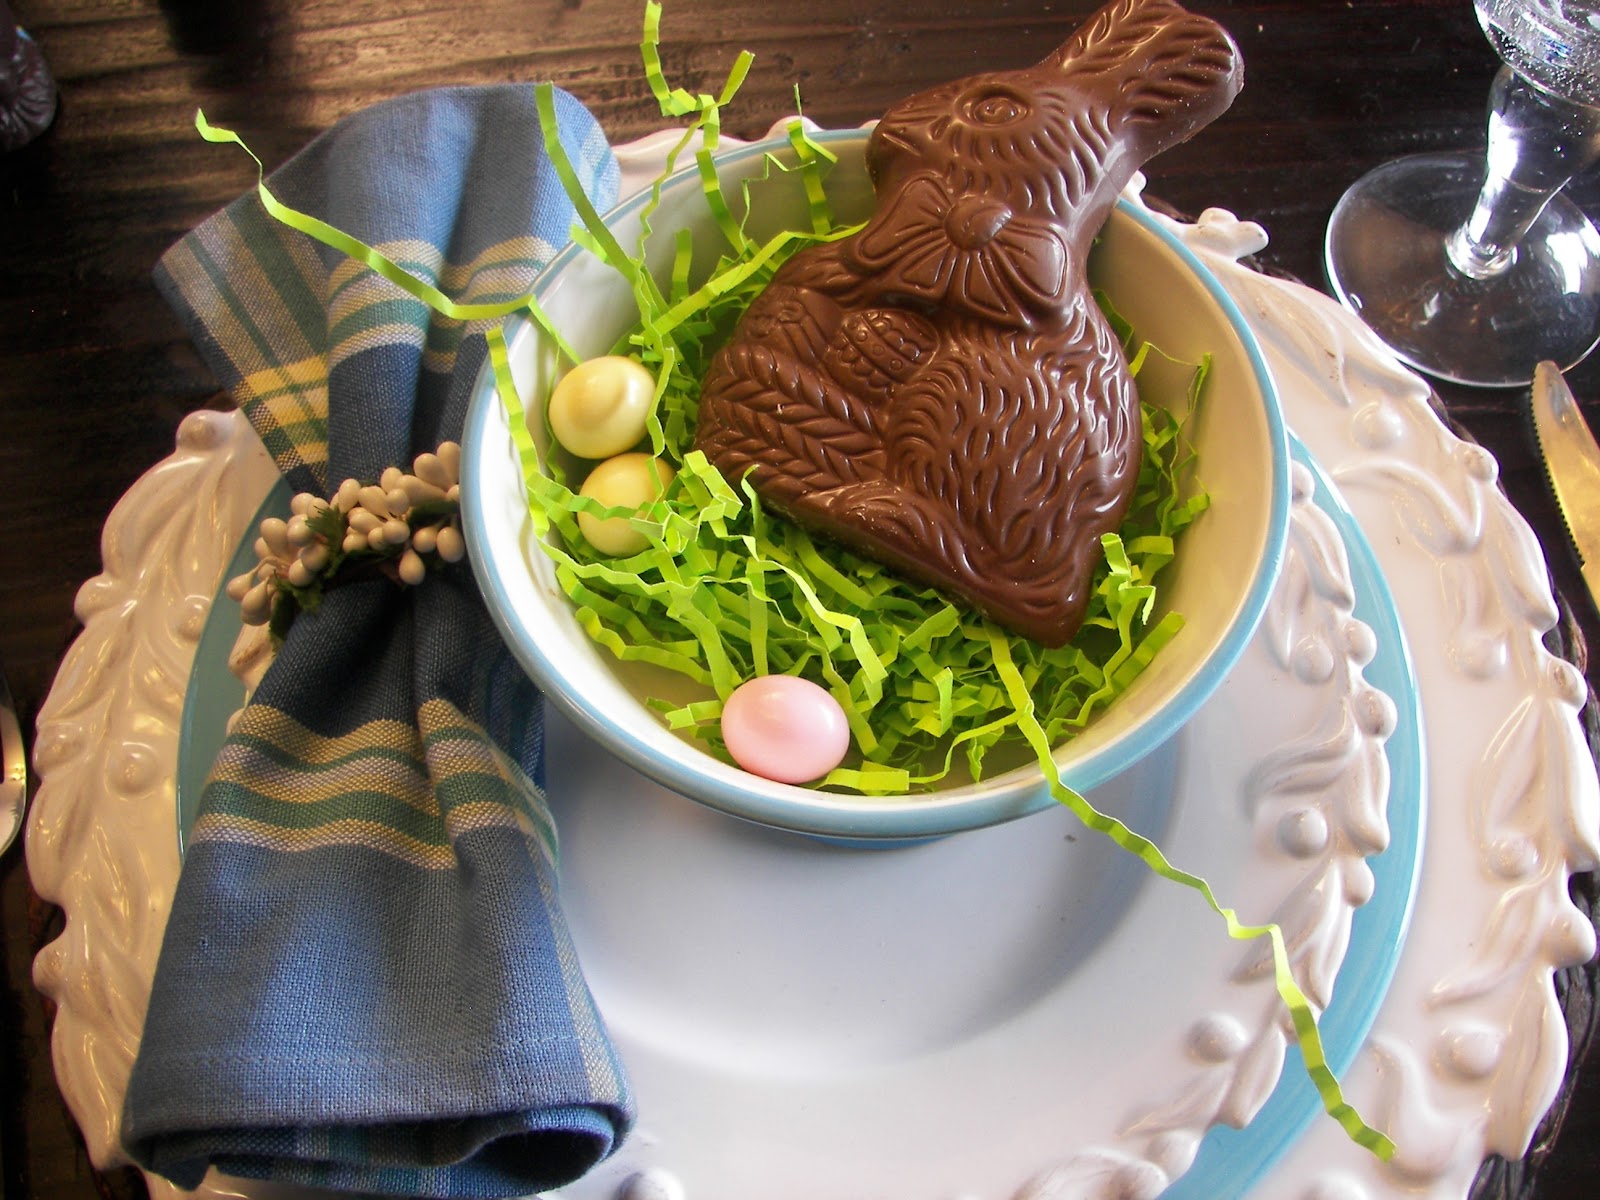 Easter Tablescape Ideas